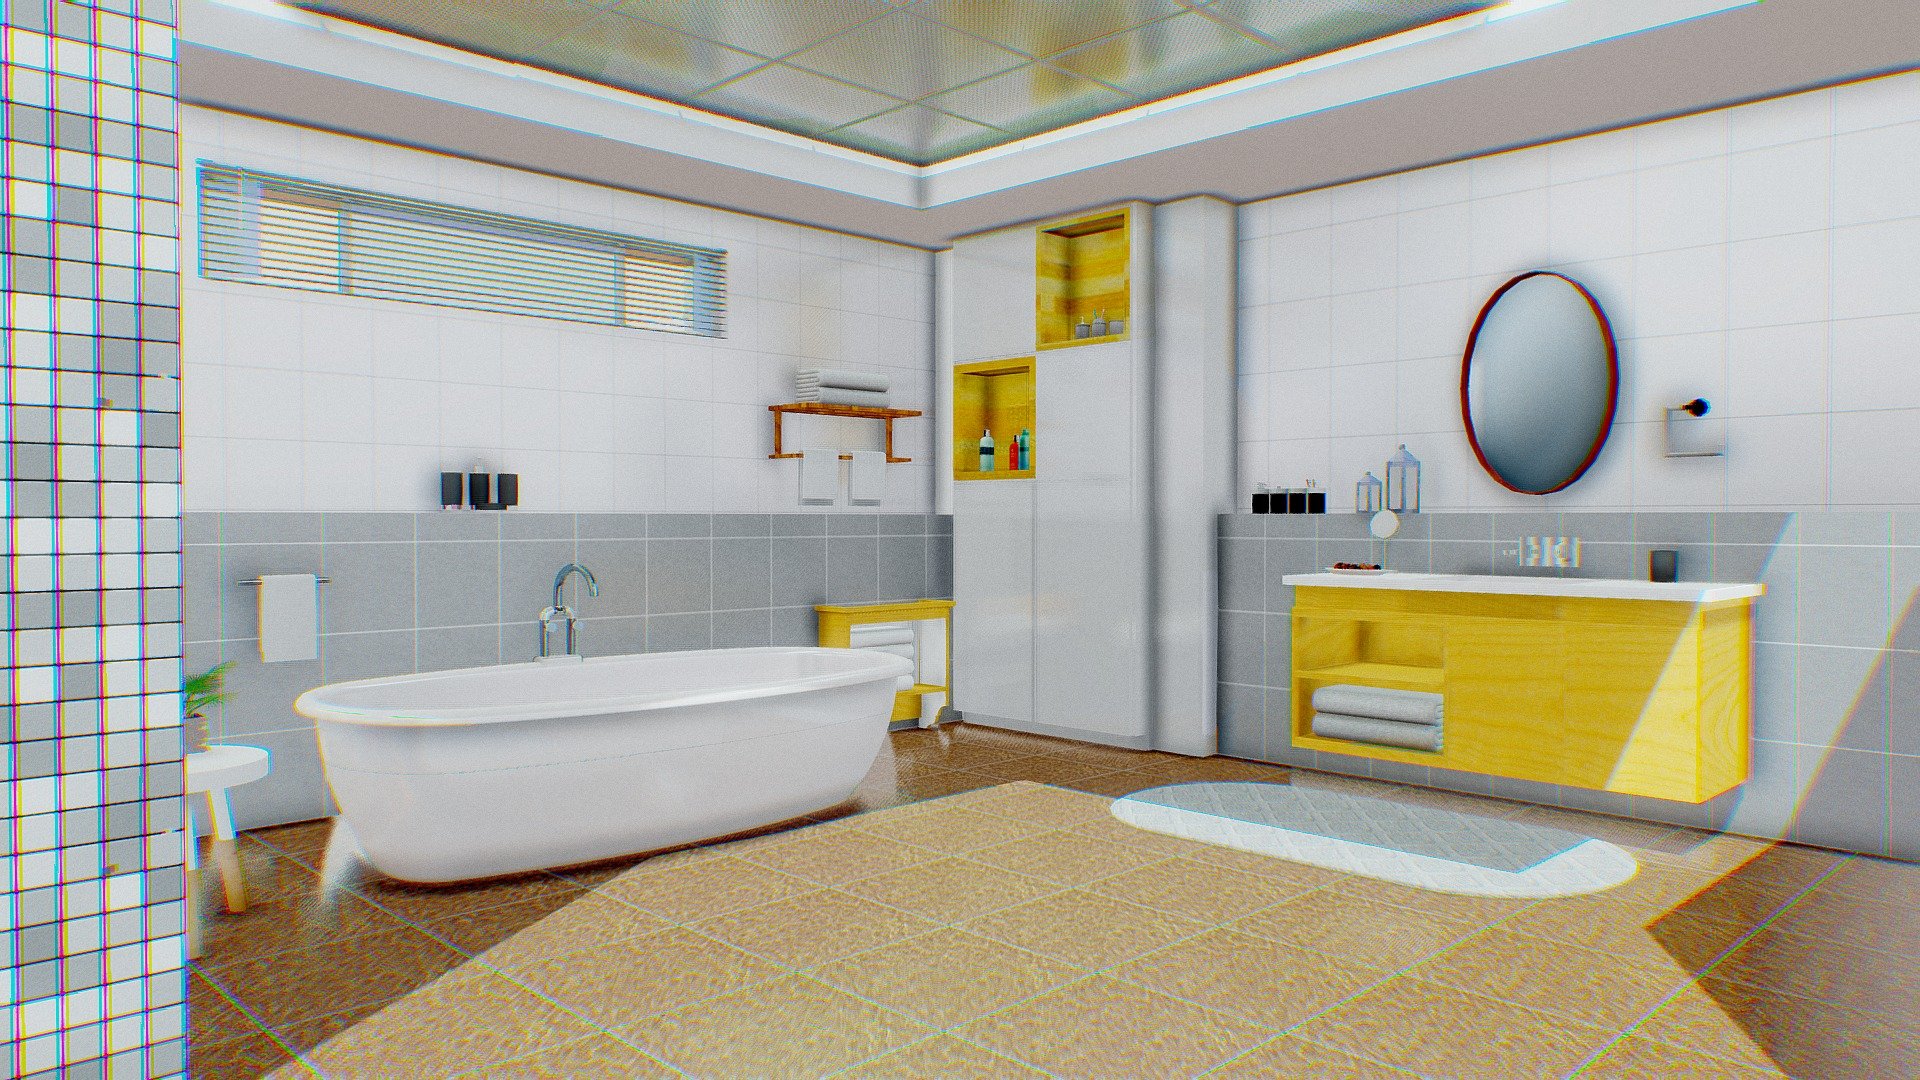 You can have a comfortable bath in the shower room 3d model